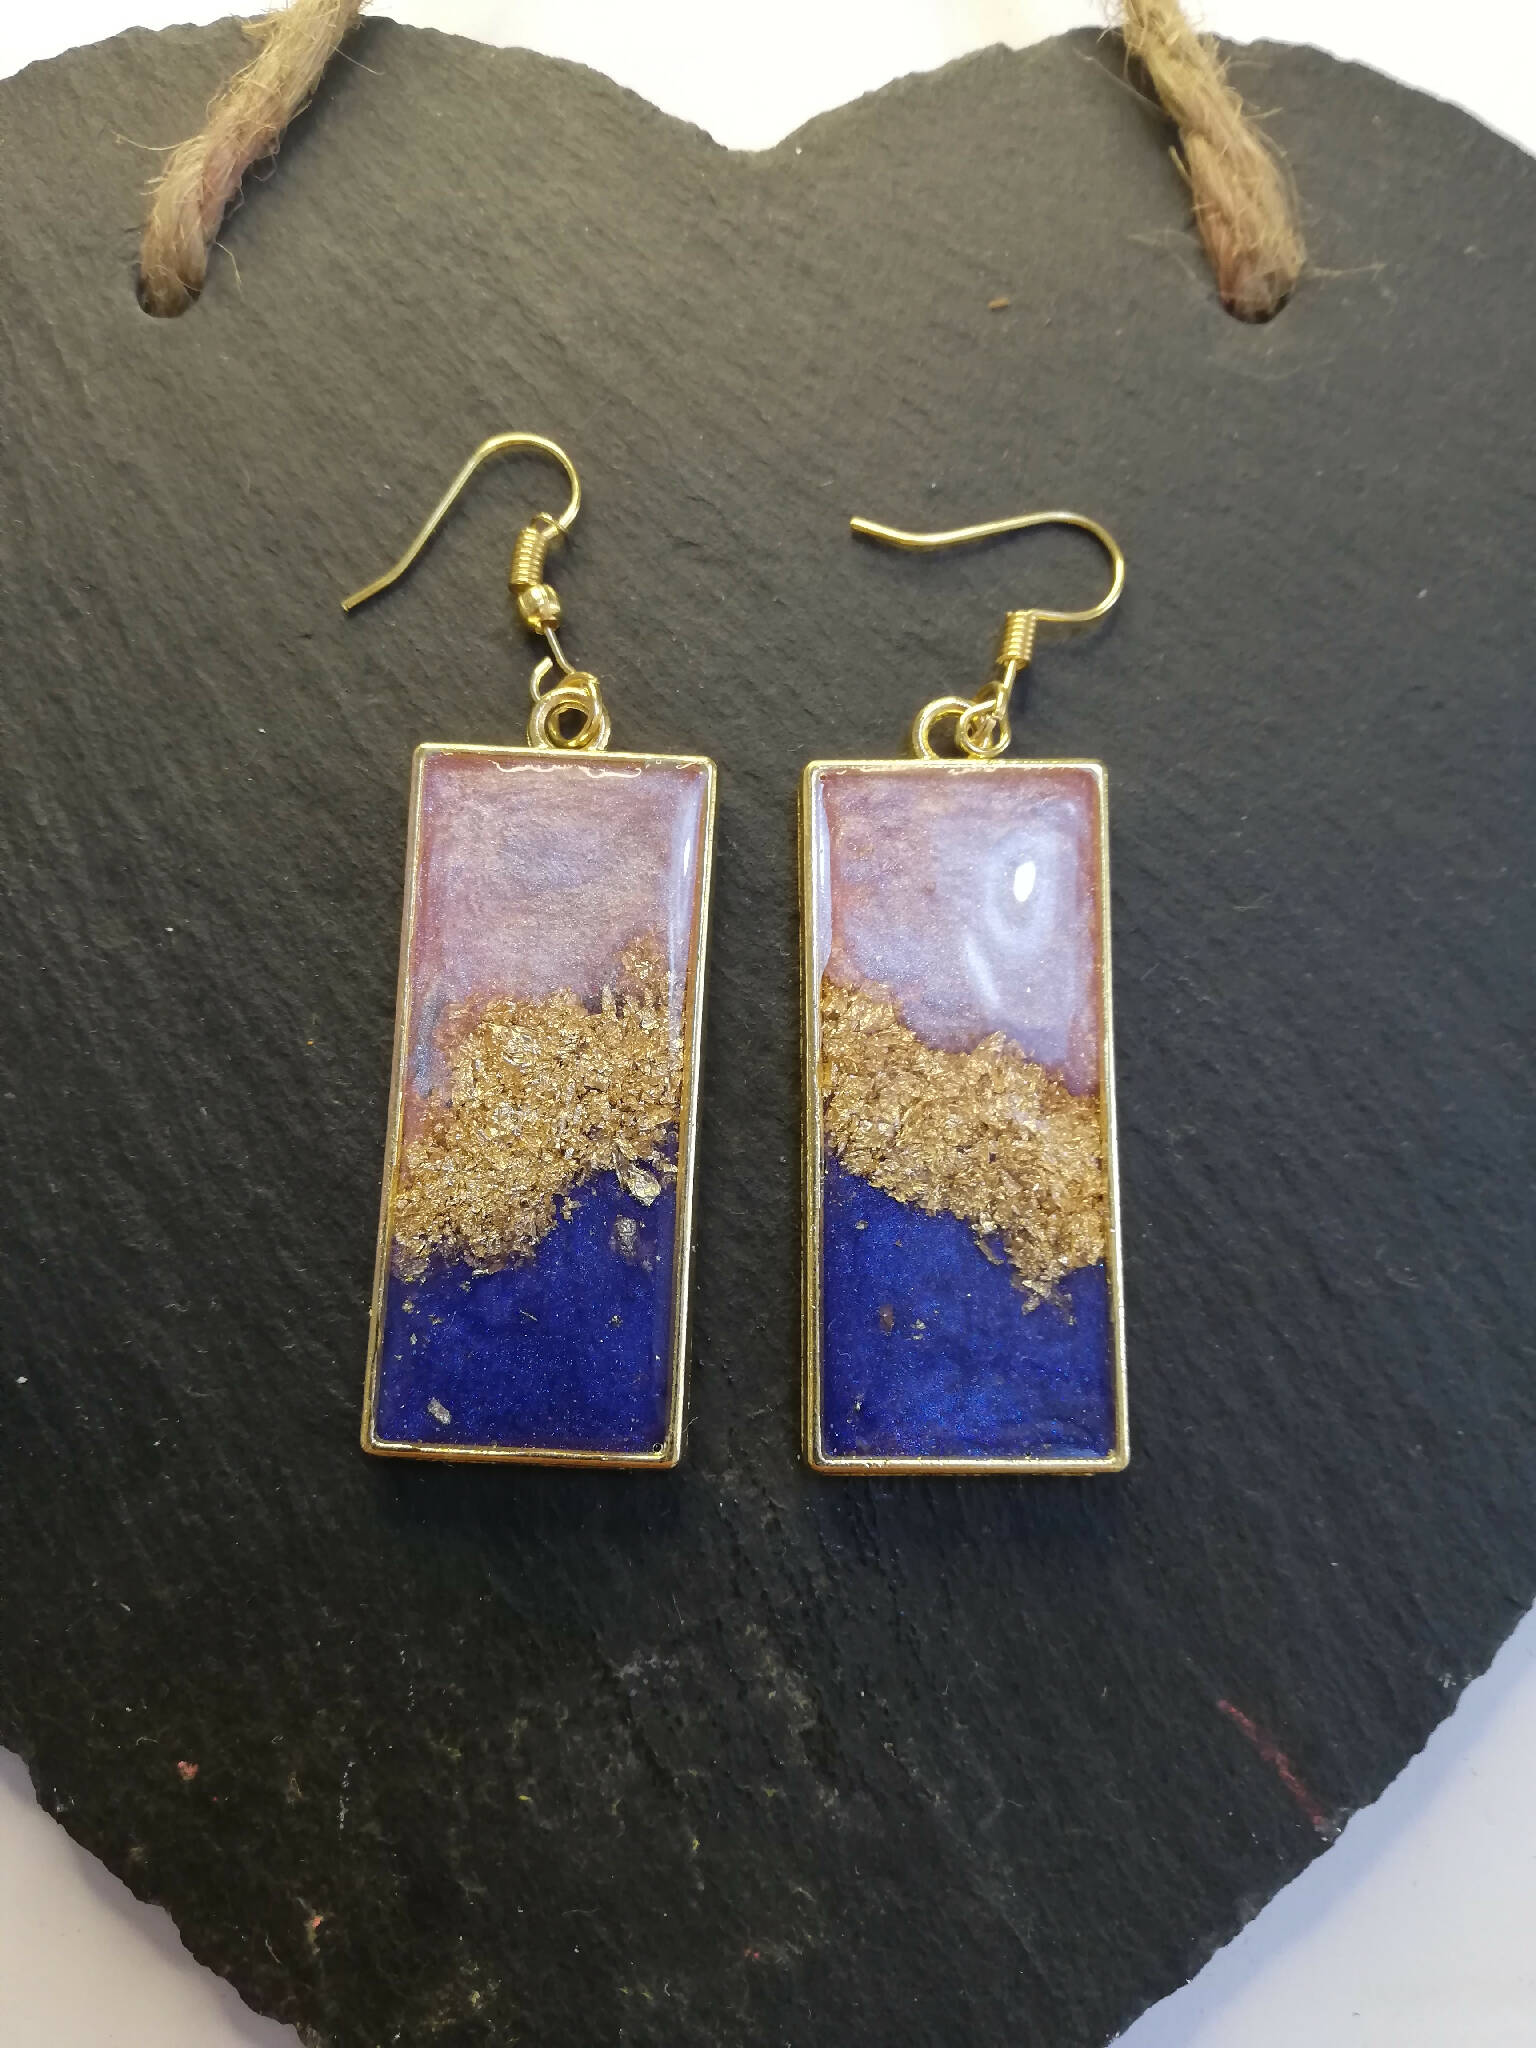 Pearly Pink and purple earrings